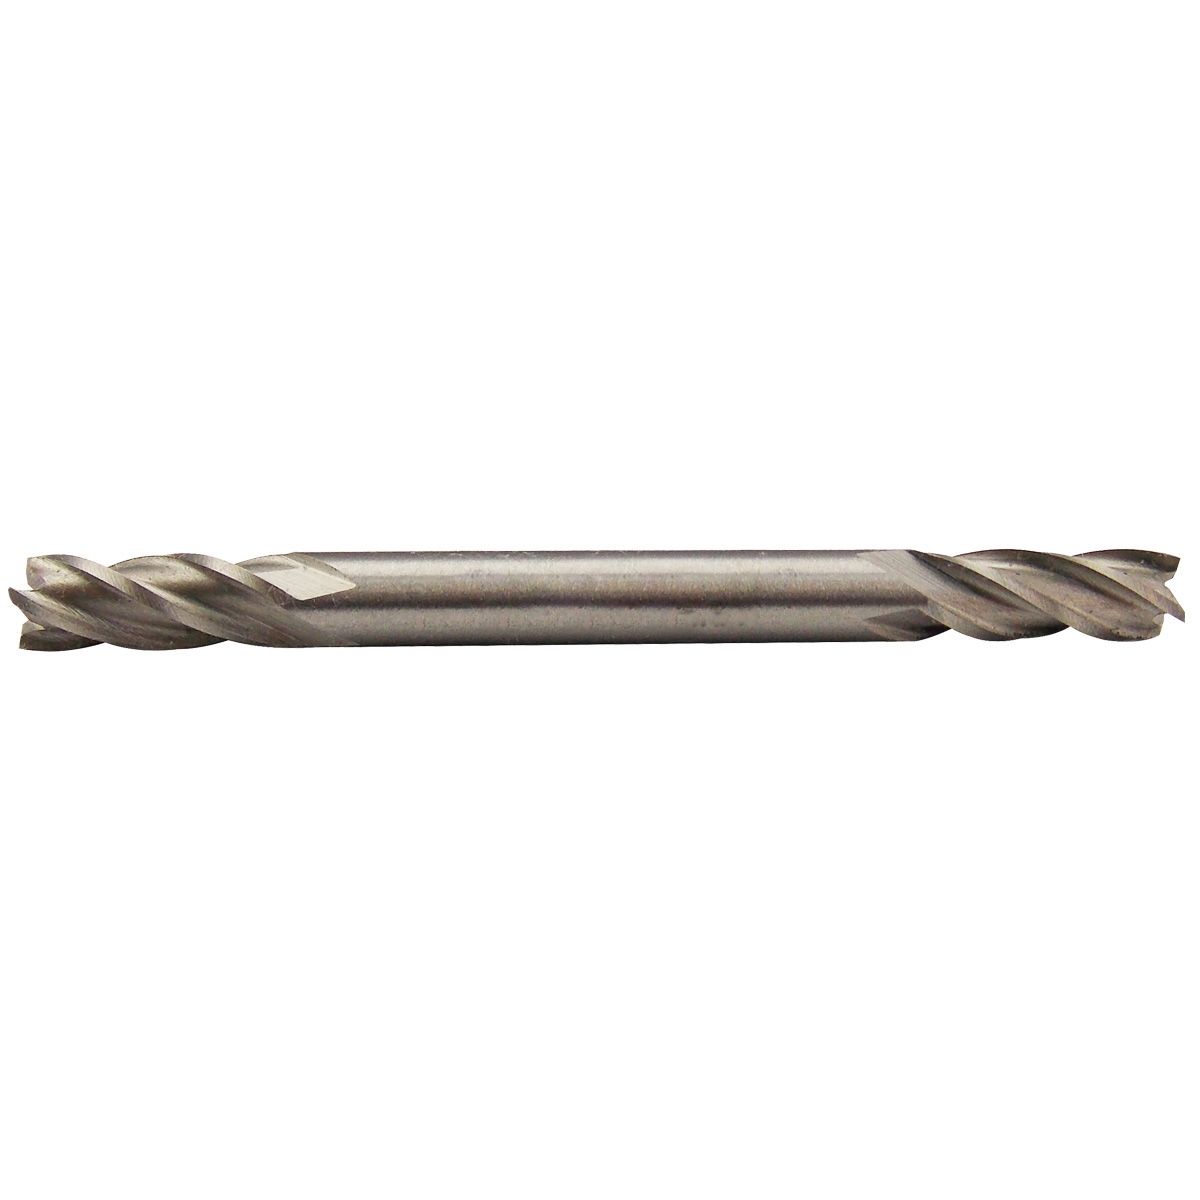 9/64" 4 FLUTE MINI HIGH SPEED STEEL DOUBLE END END MILL (5831-0028)